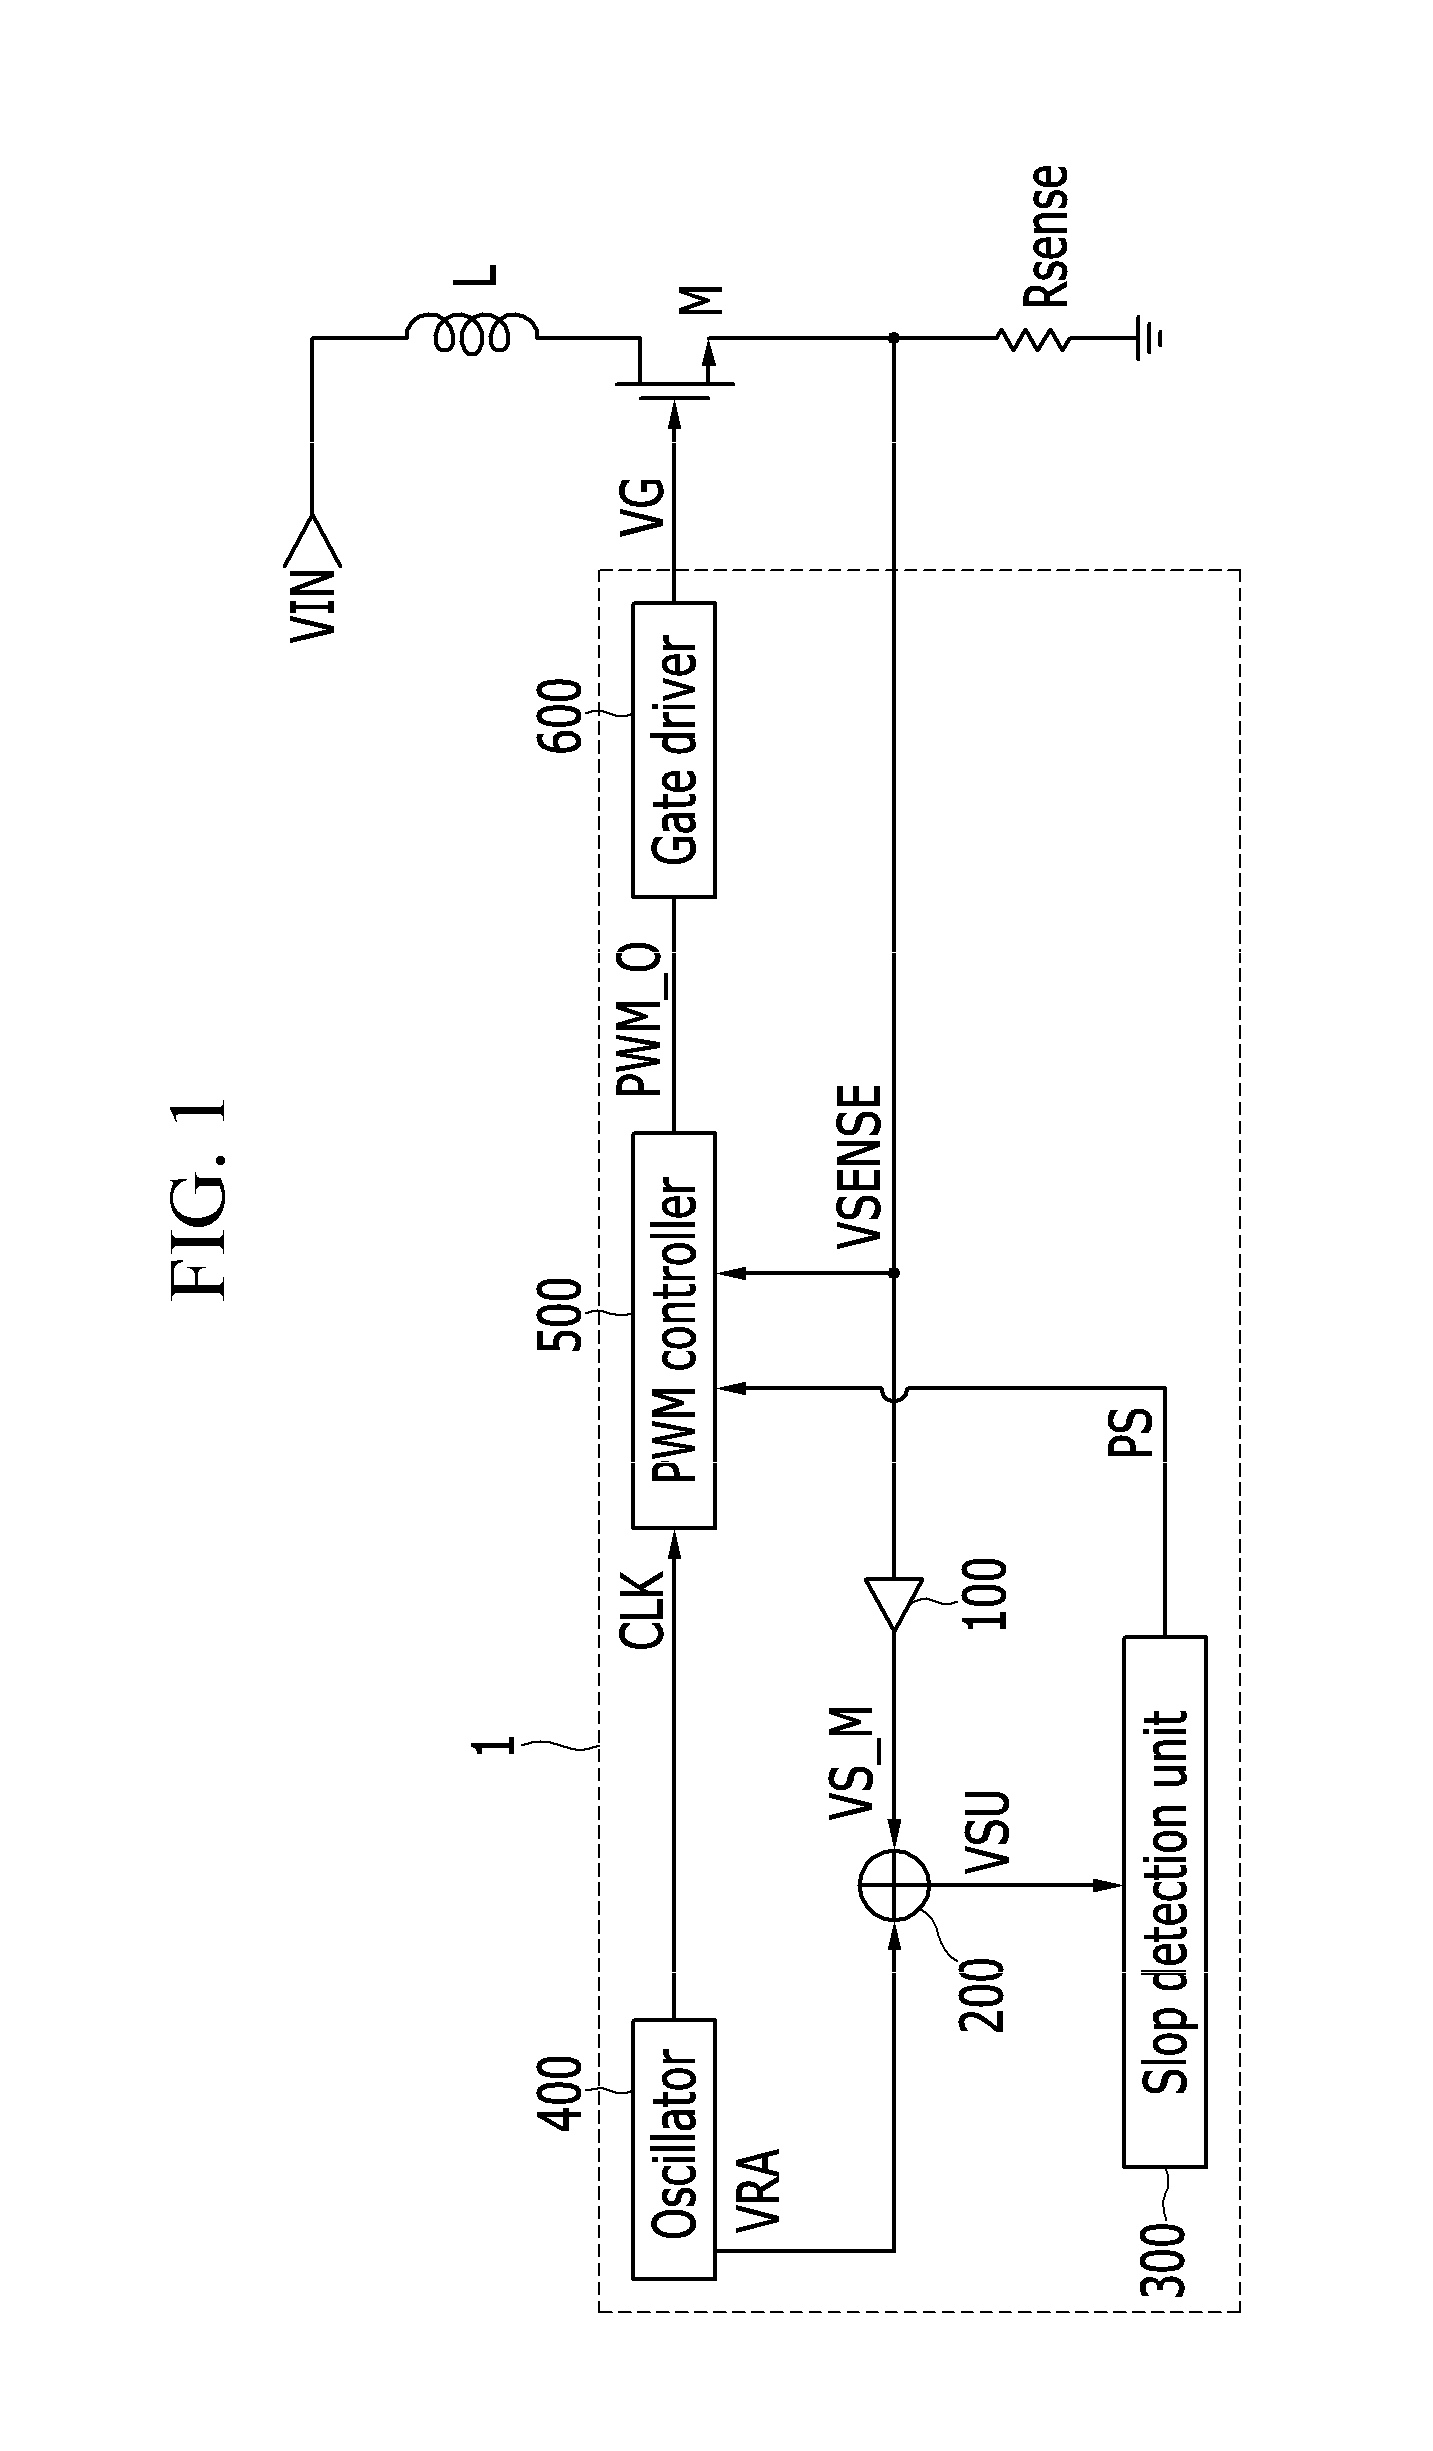 Switch controller, switch control method, and power supply device comprising the switch controller